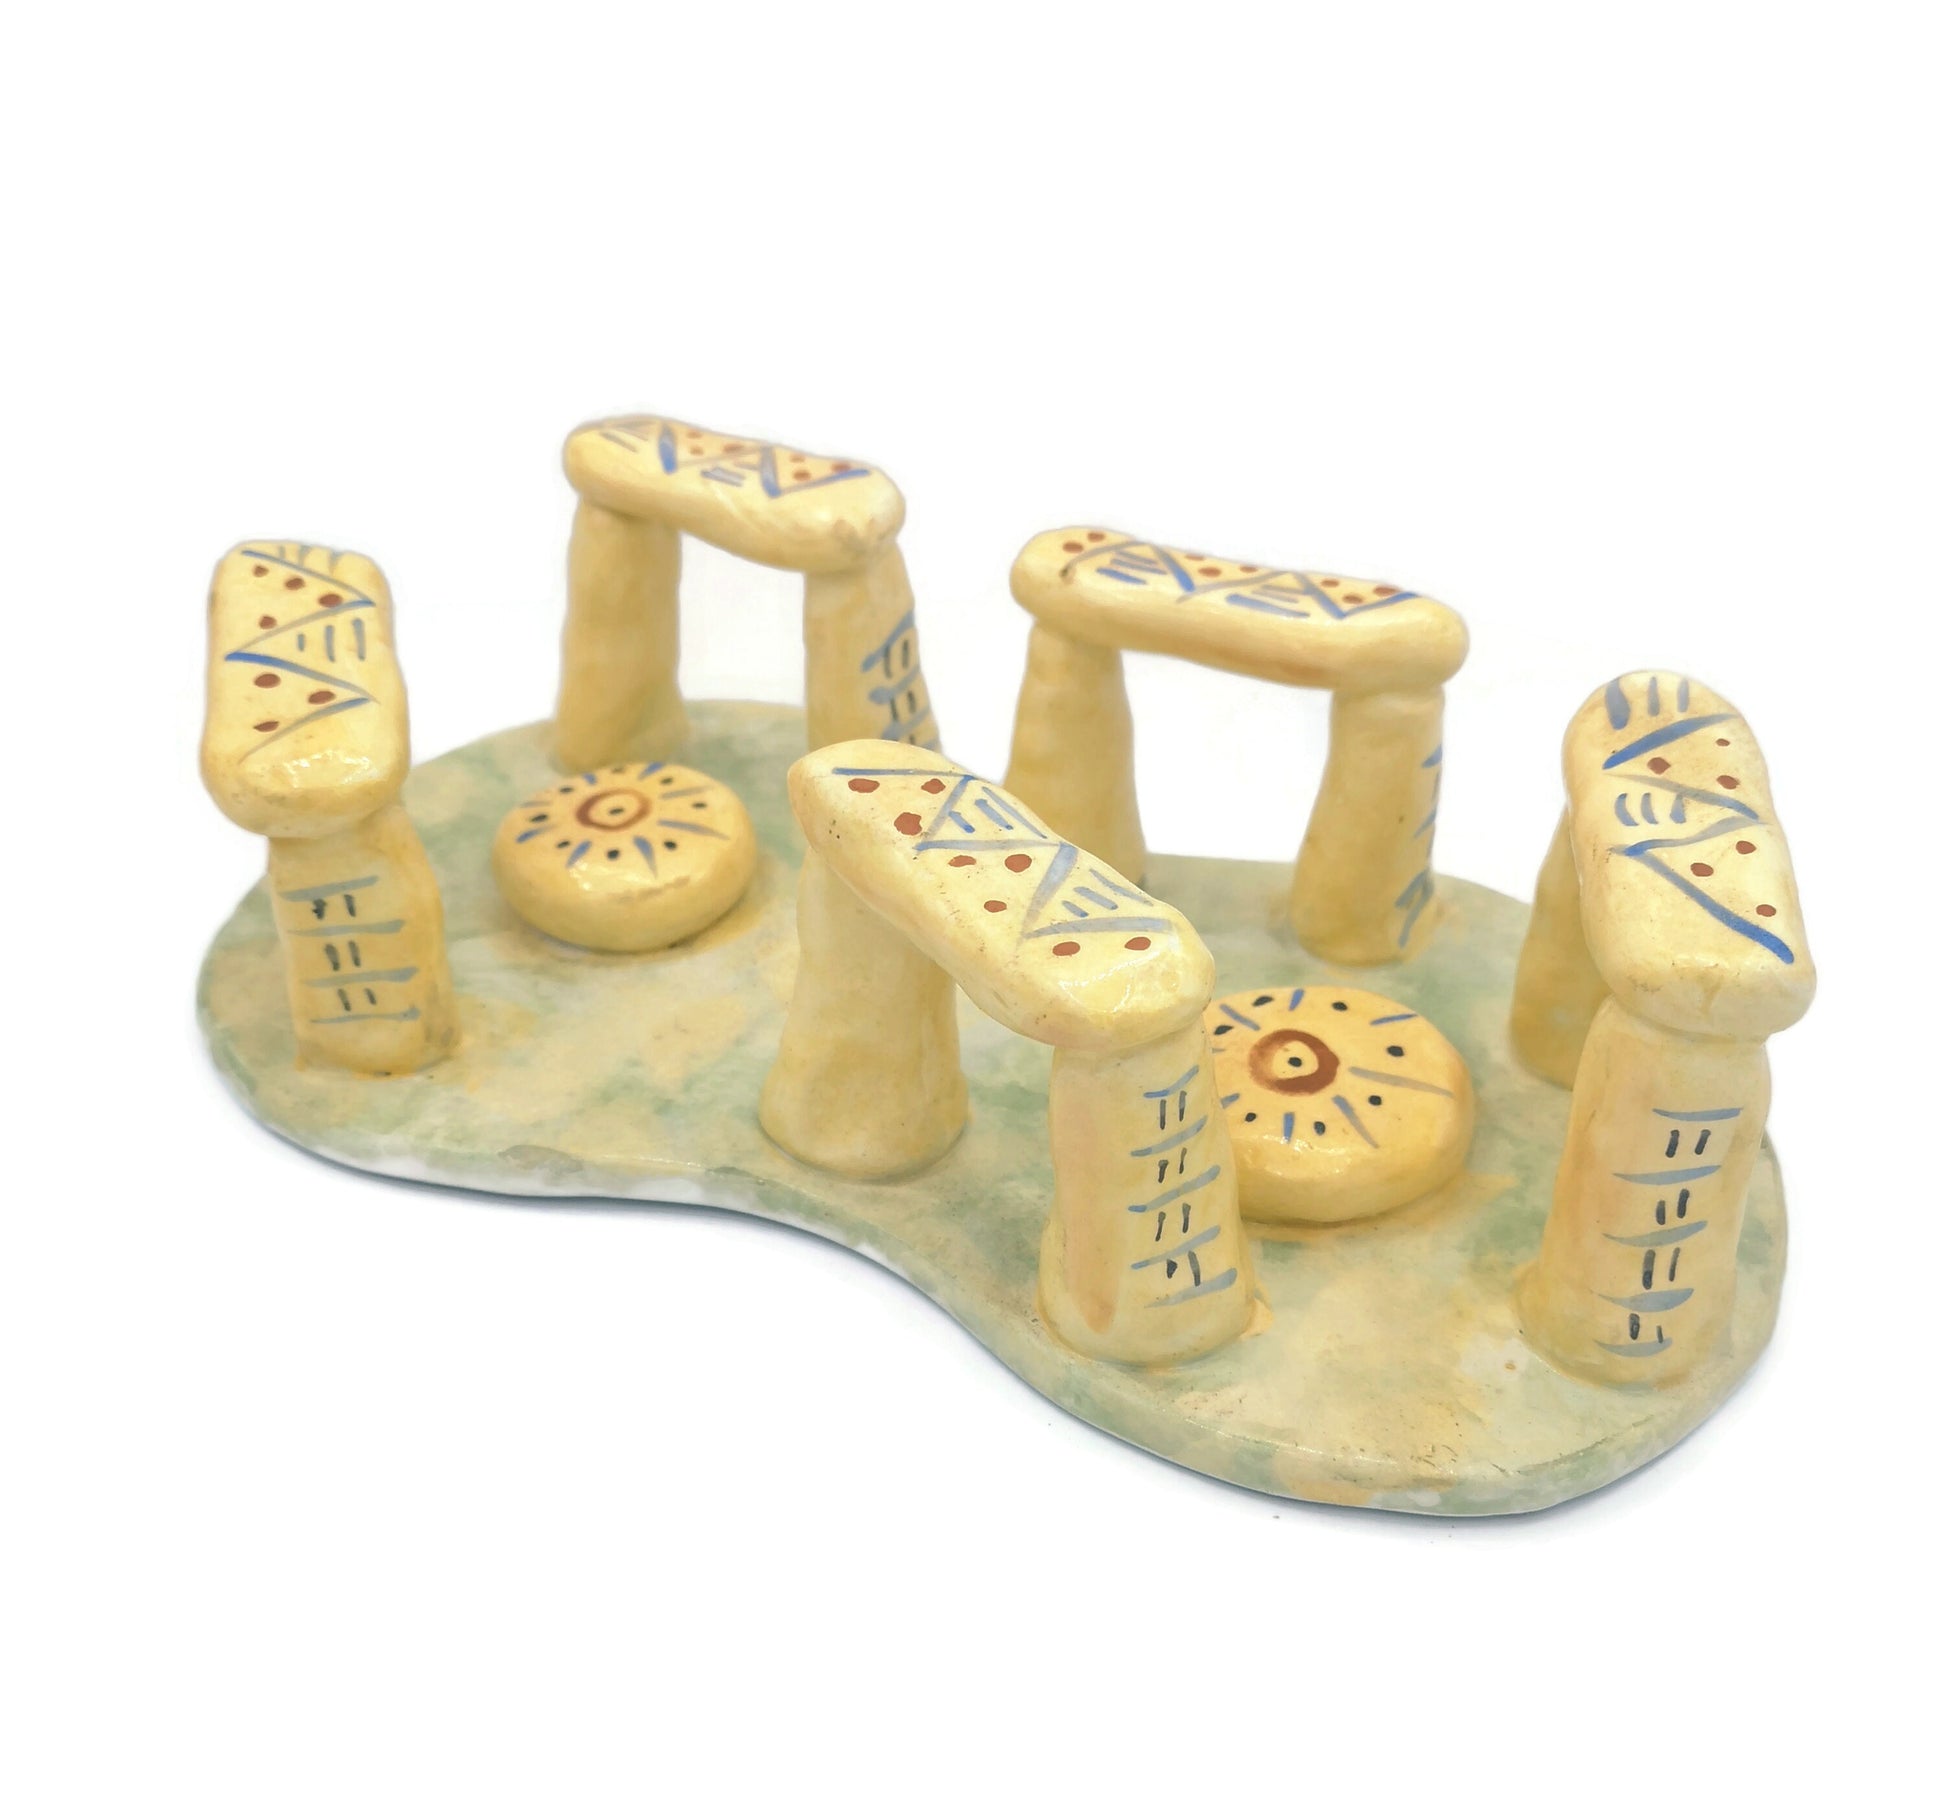 Handmade Ceramic Sculpture Inspired by Megalithic Monuments | Unique Home Decor | Gift for Creative People - Ceramica Ana Rafael